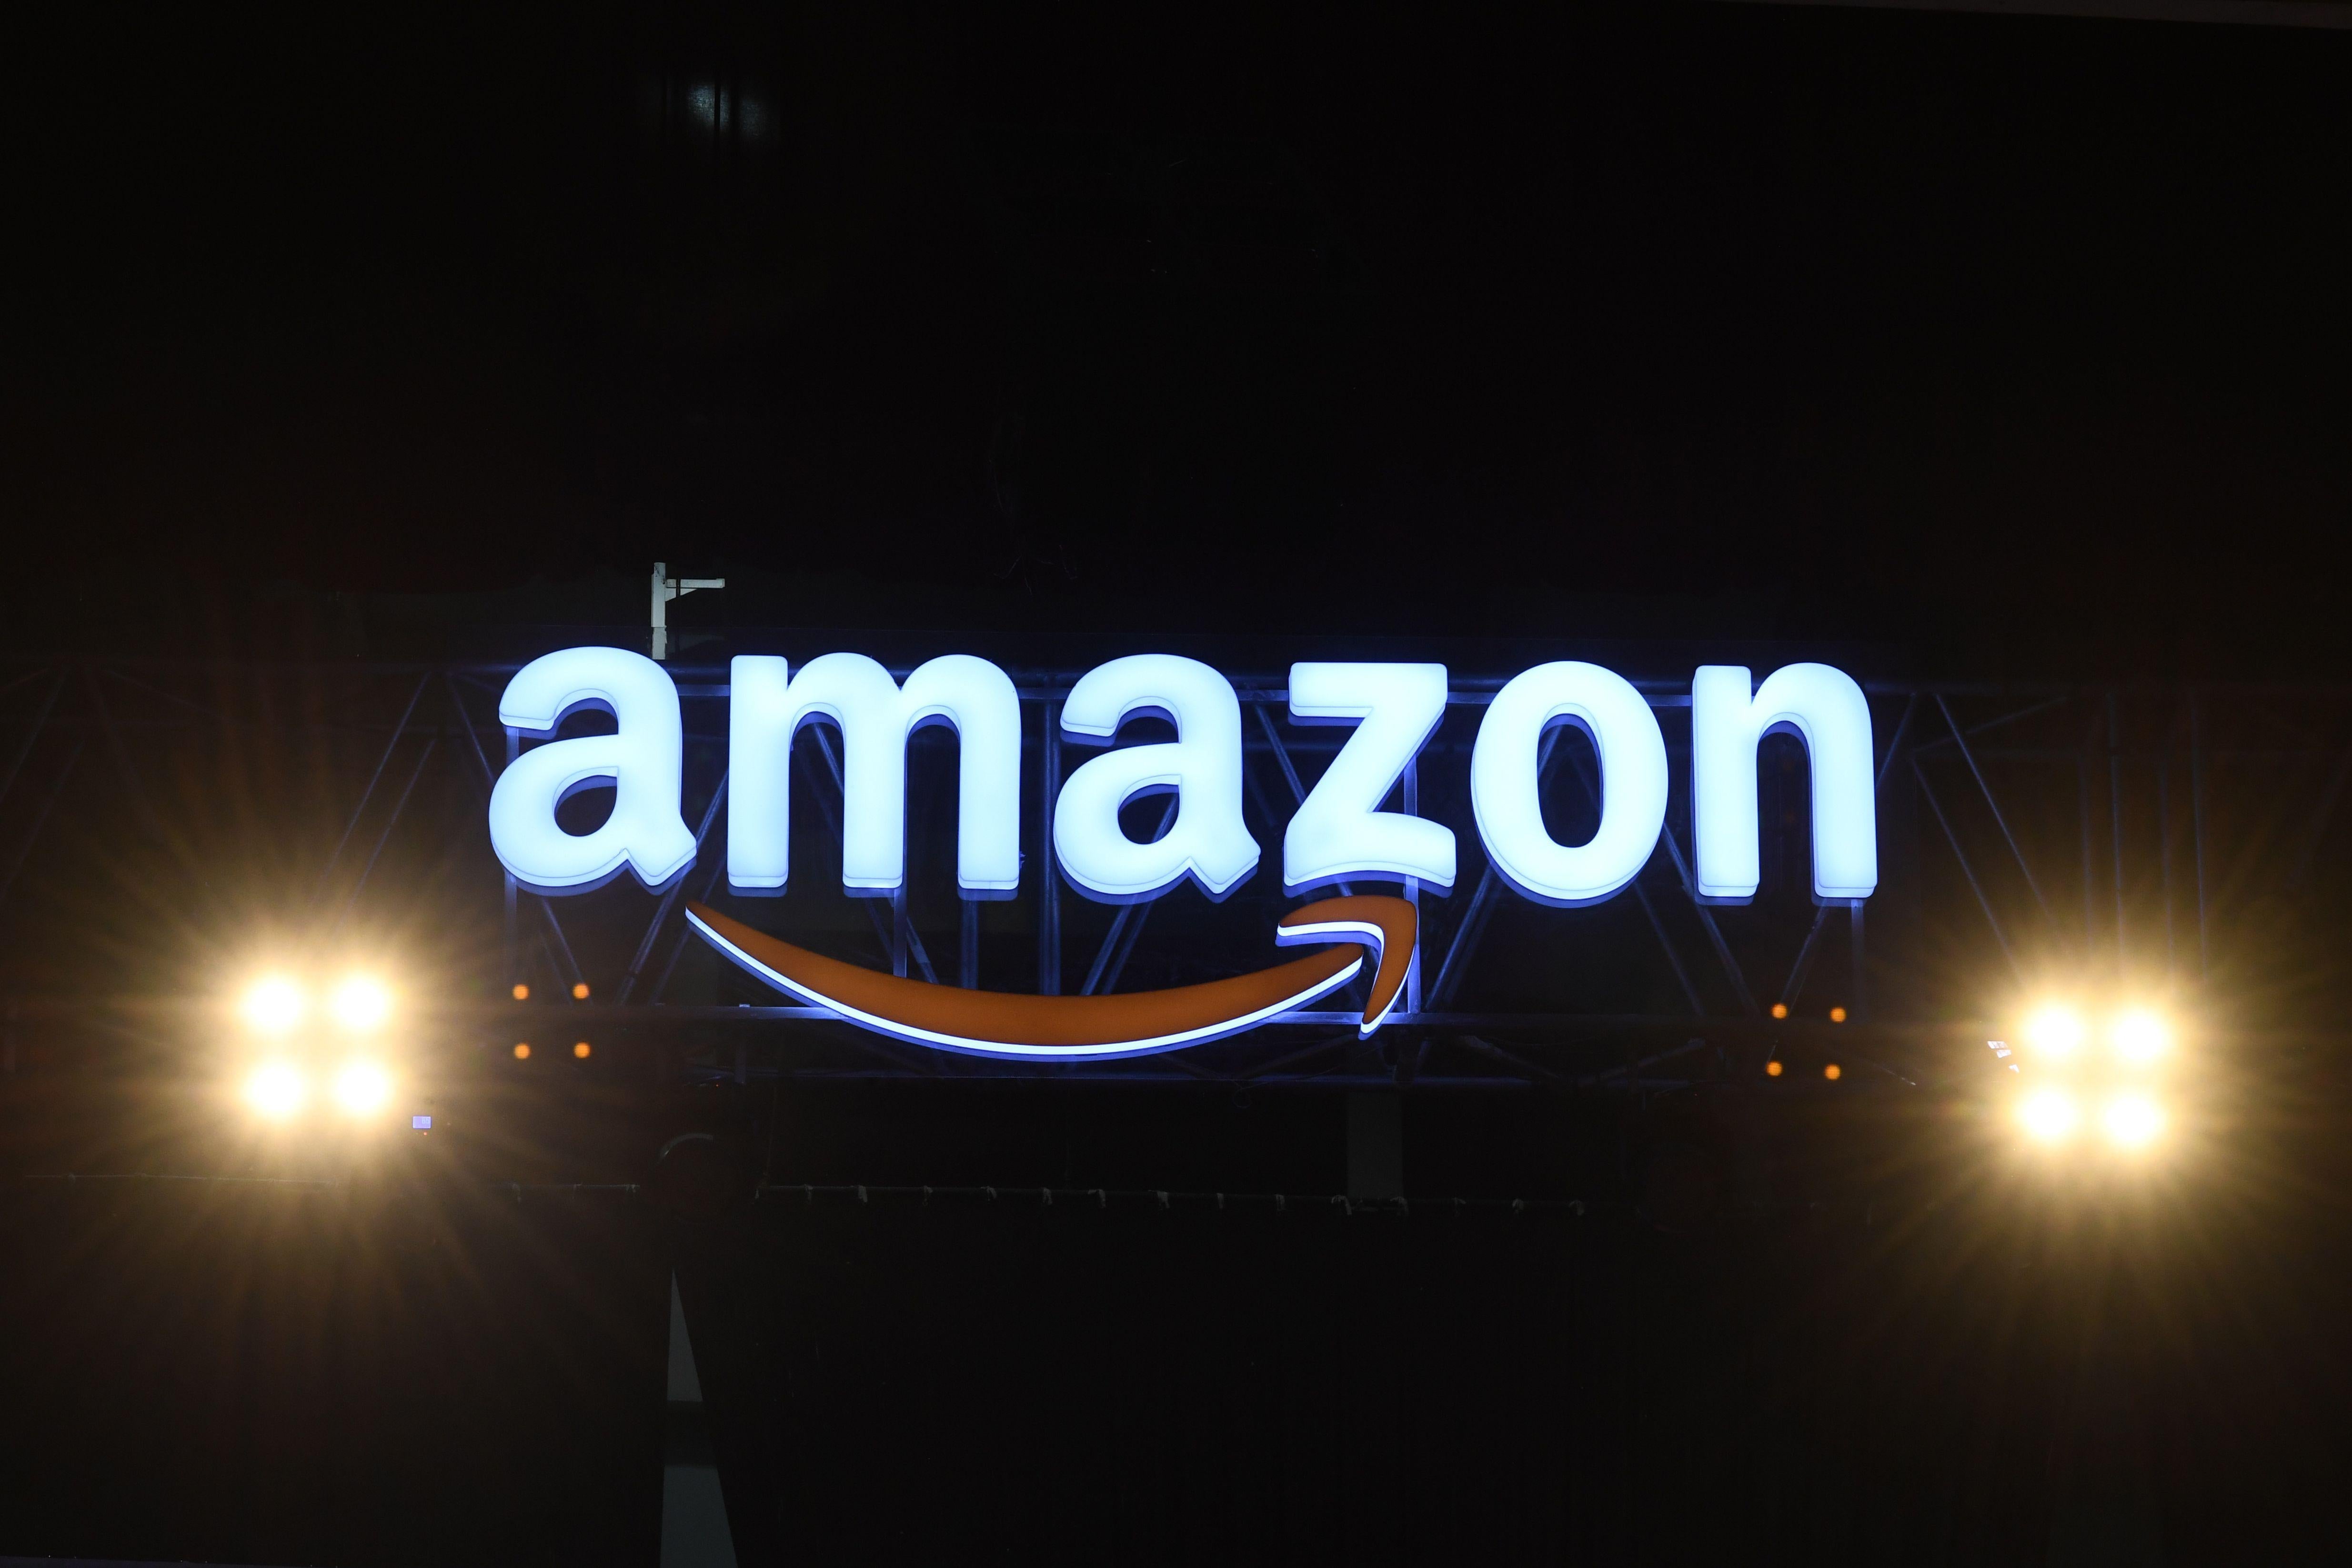 An Amazon logo bookended by bright lights.